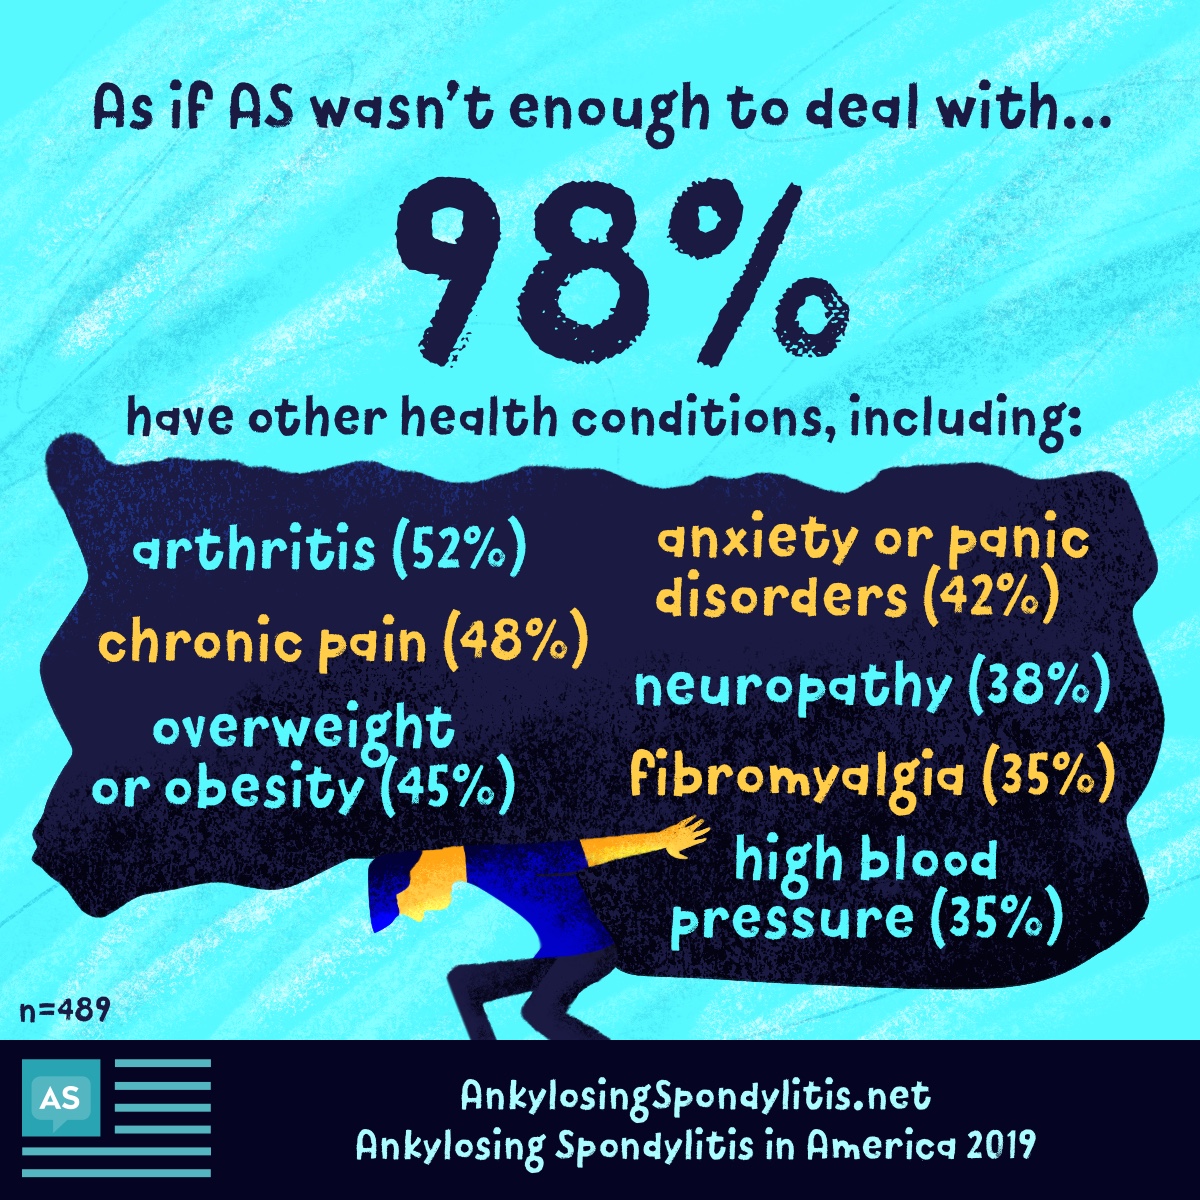 98% of people have other health conditions including arthritis (52%), chronic pain (48%), overweight or obesity (45%), anxiety (42%), neuropathy (38%), fibromyalgia (35%), high blood pressure (35%).